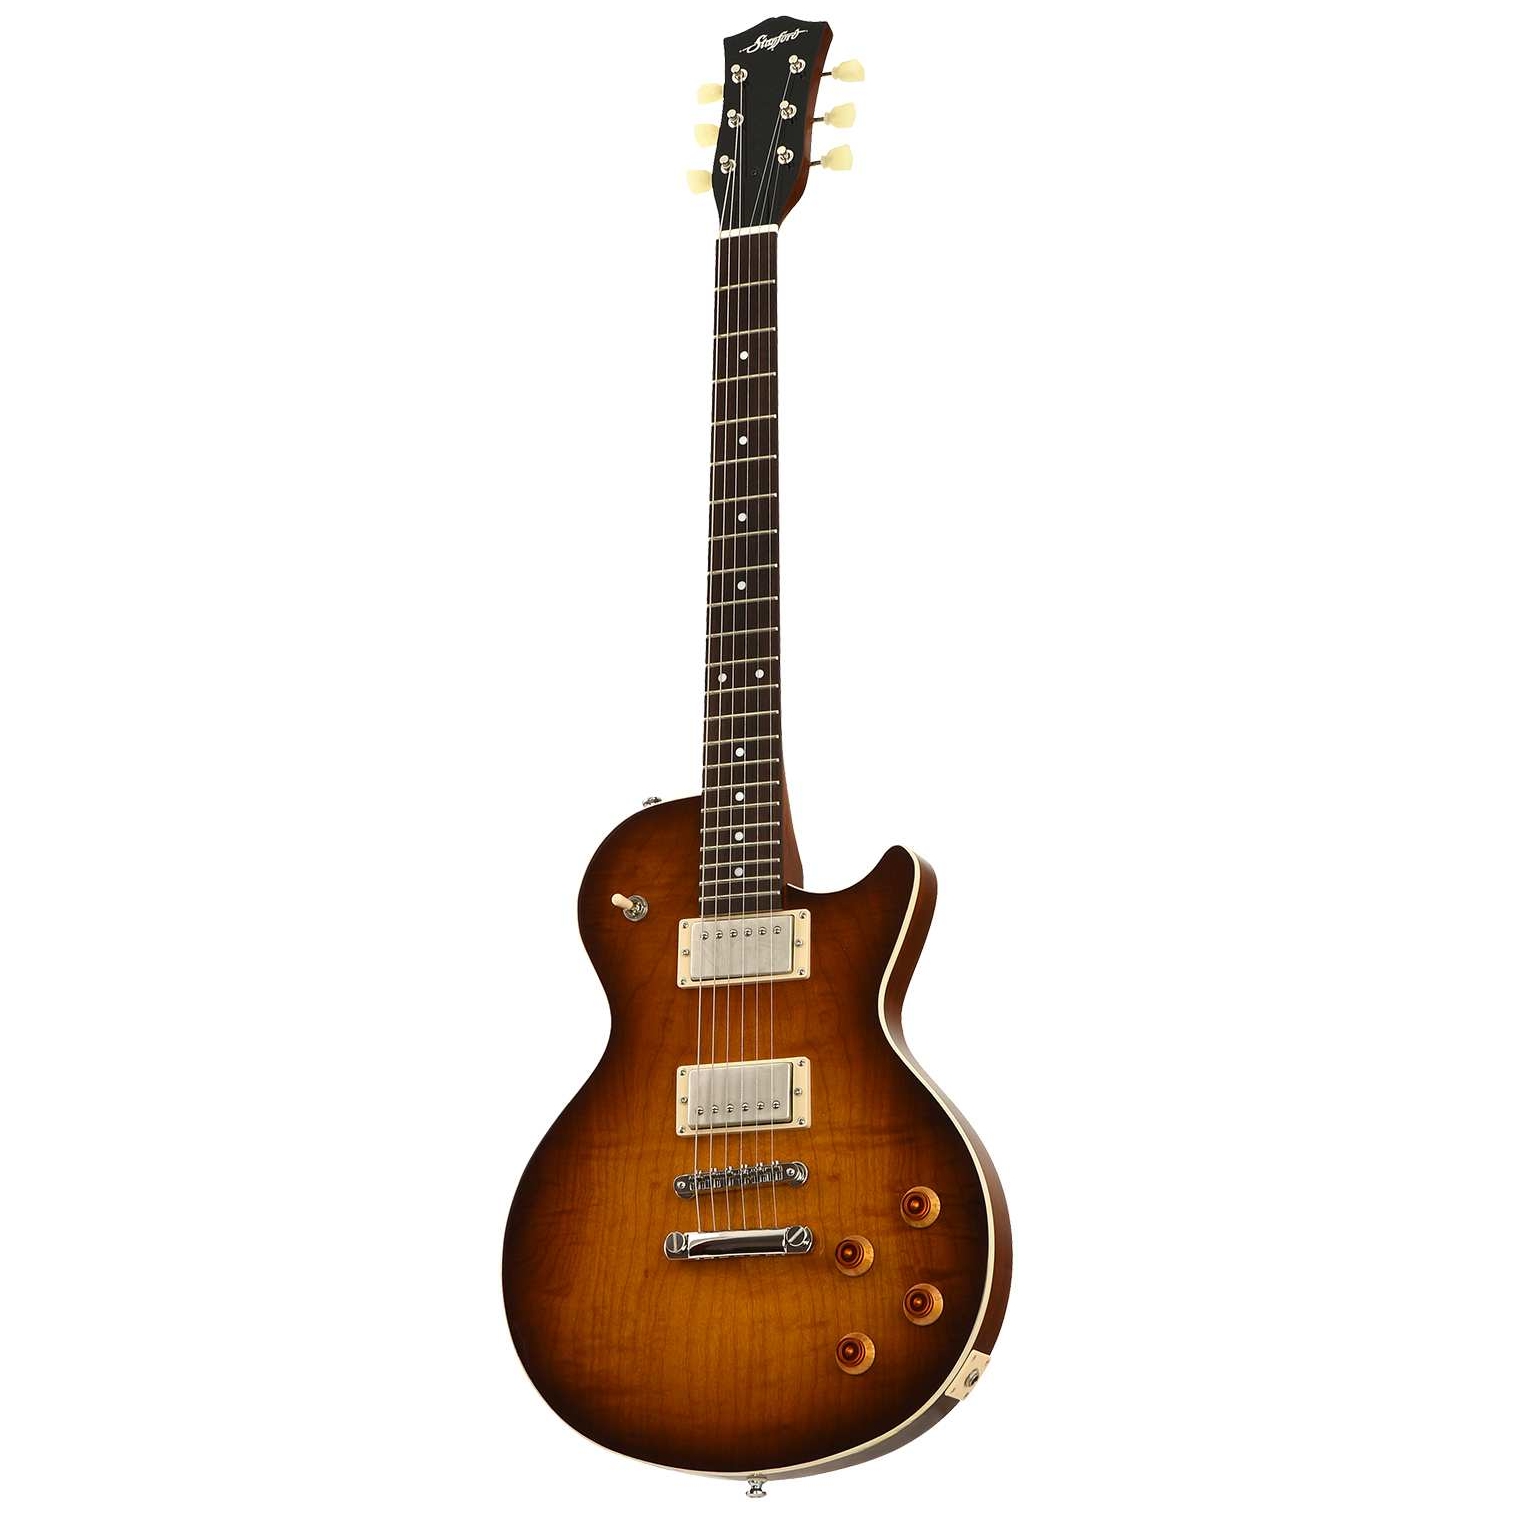 Stanford CR Marquee Classic Amber